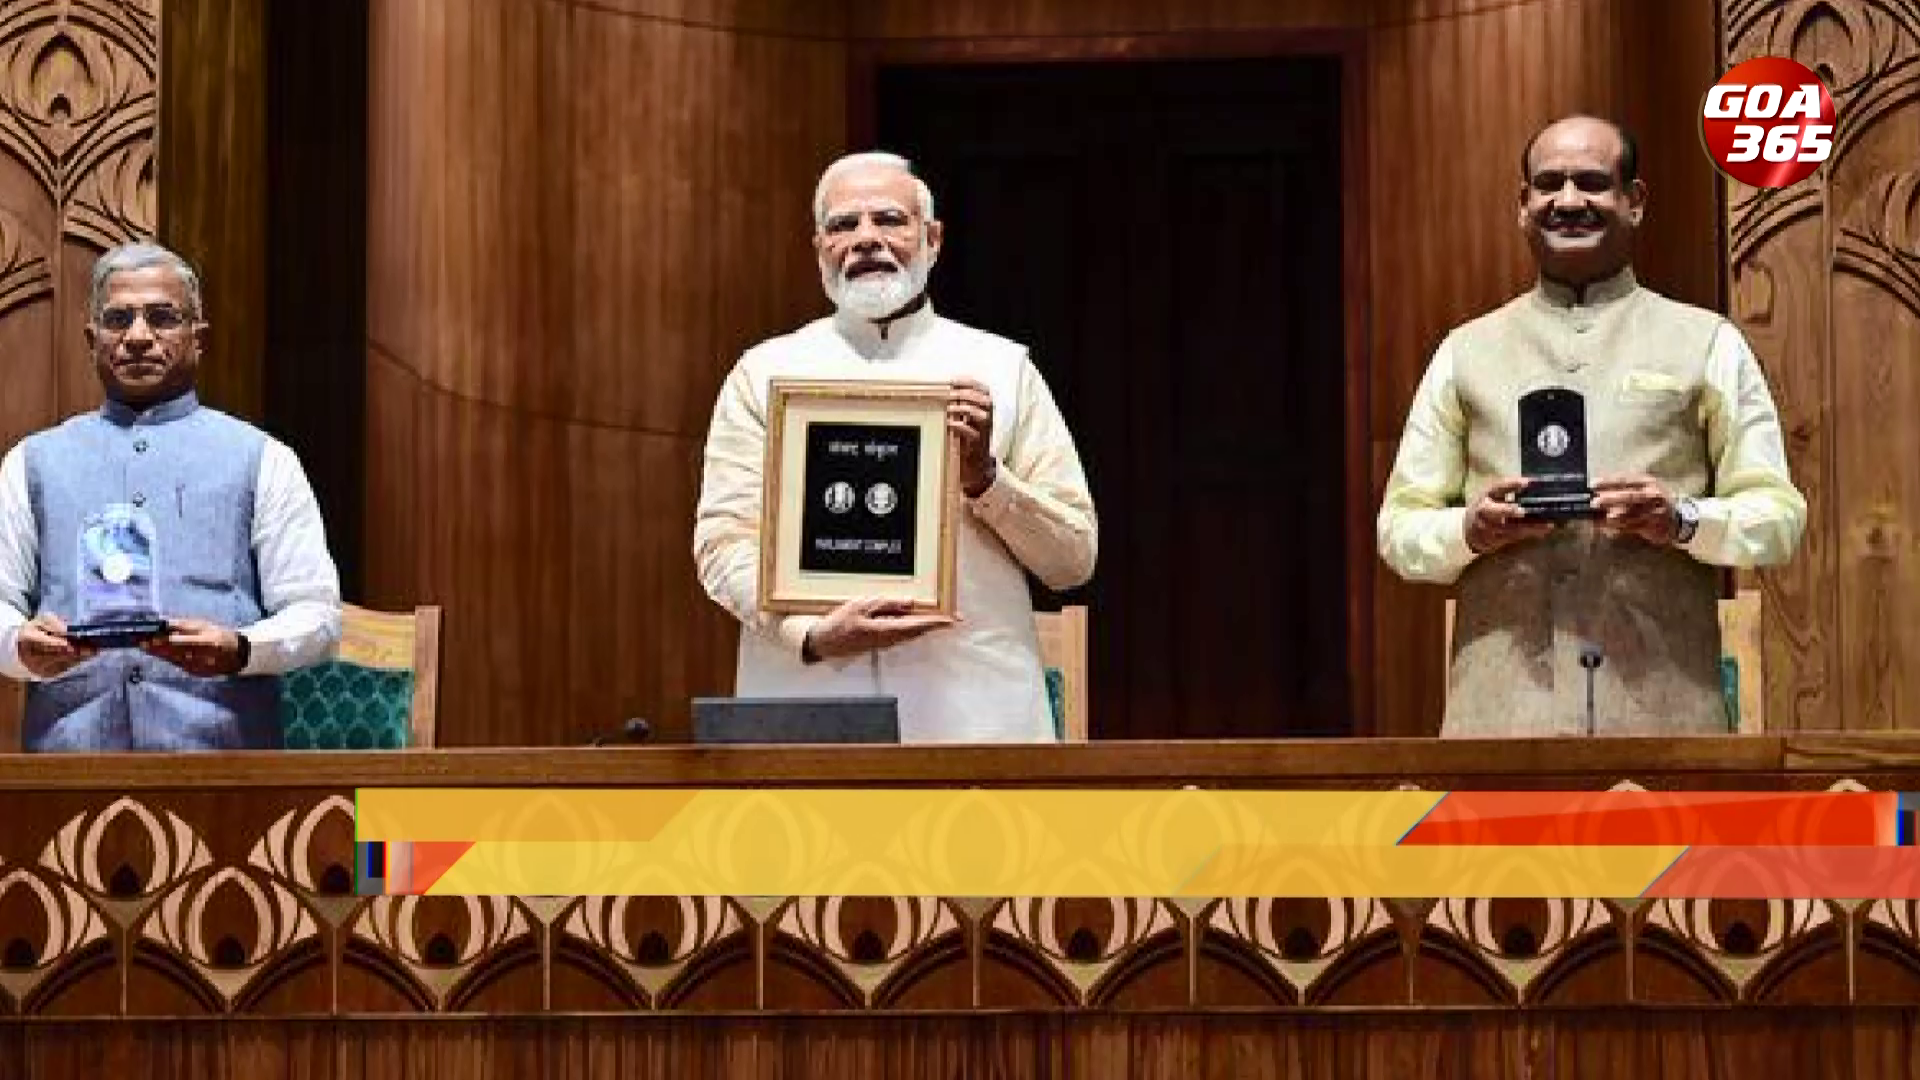 75 Rs denomination coin released to mark inauguration of new Parl bldg 